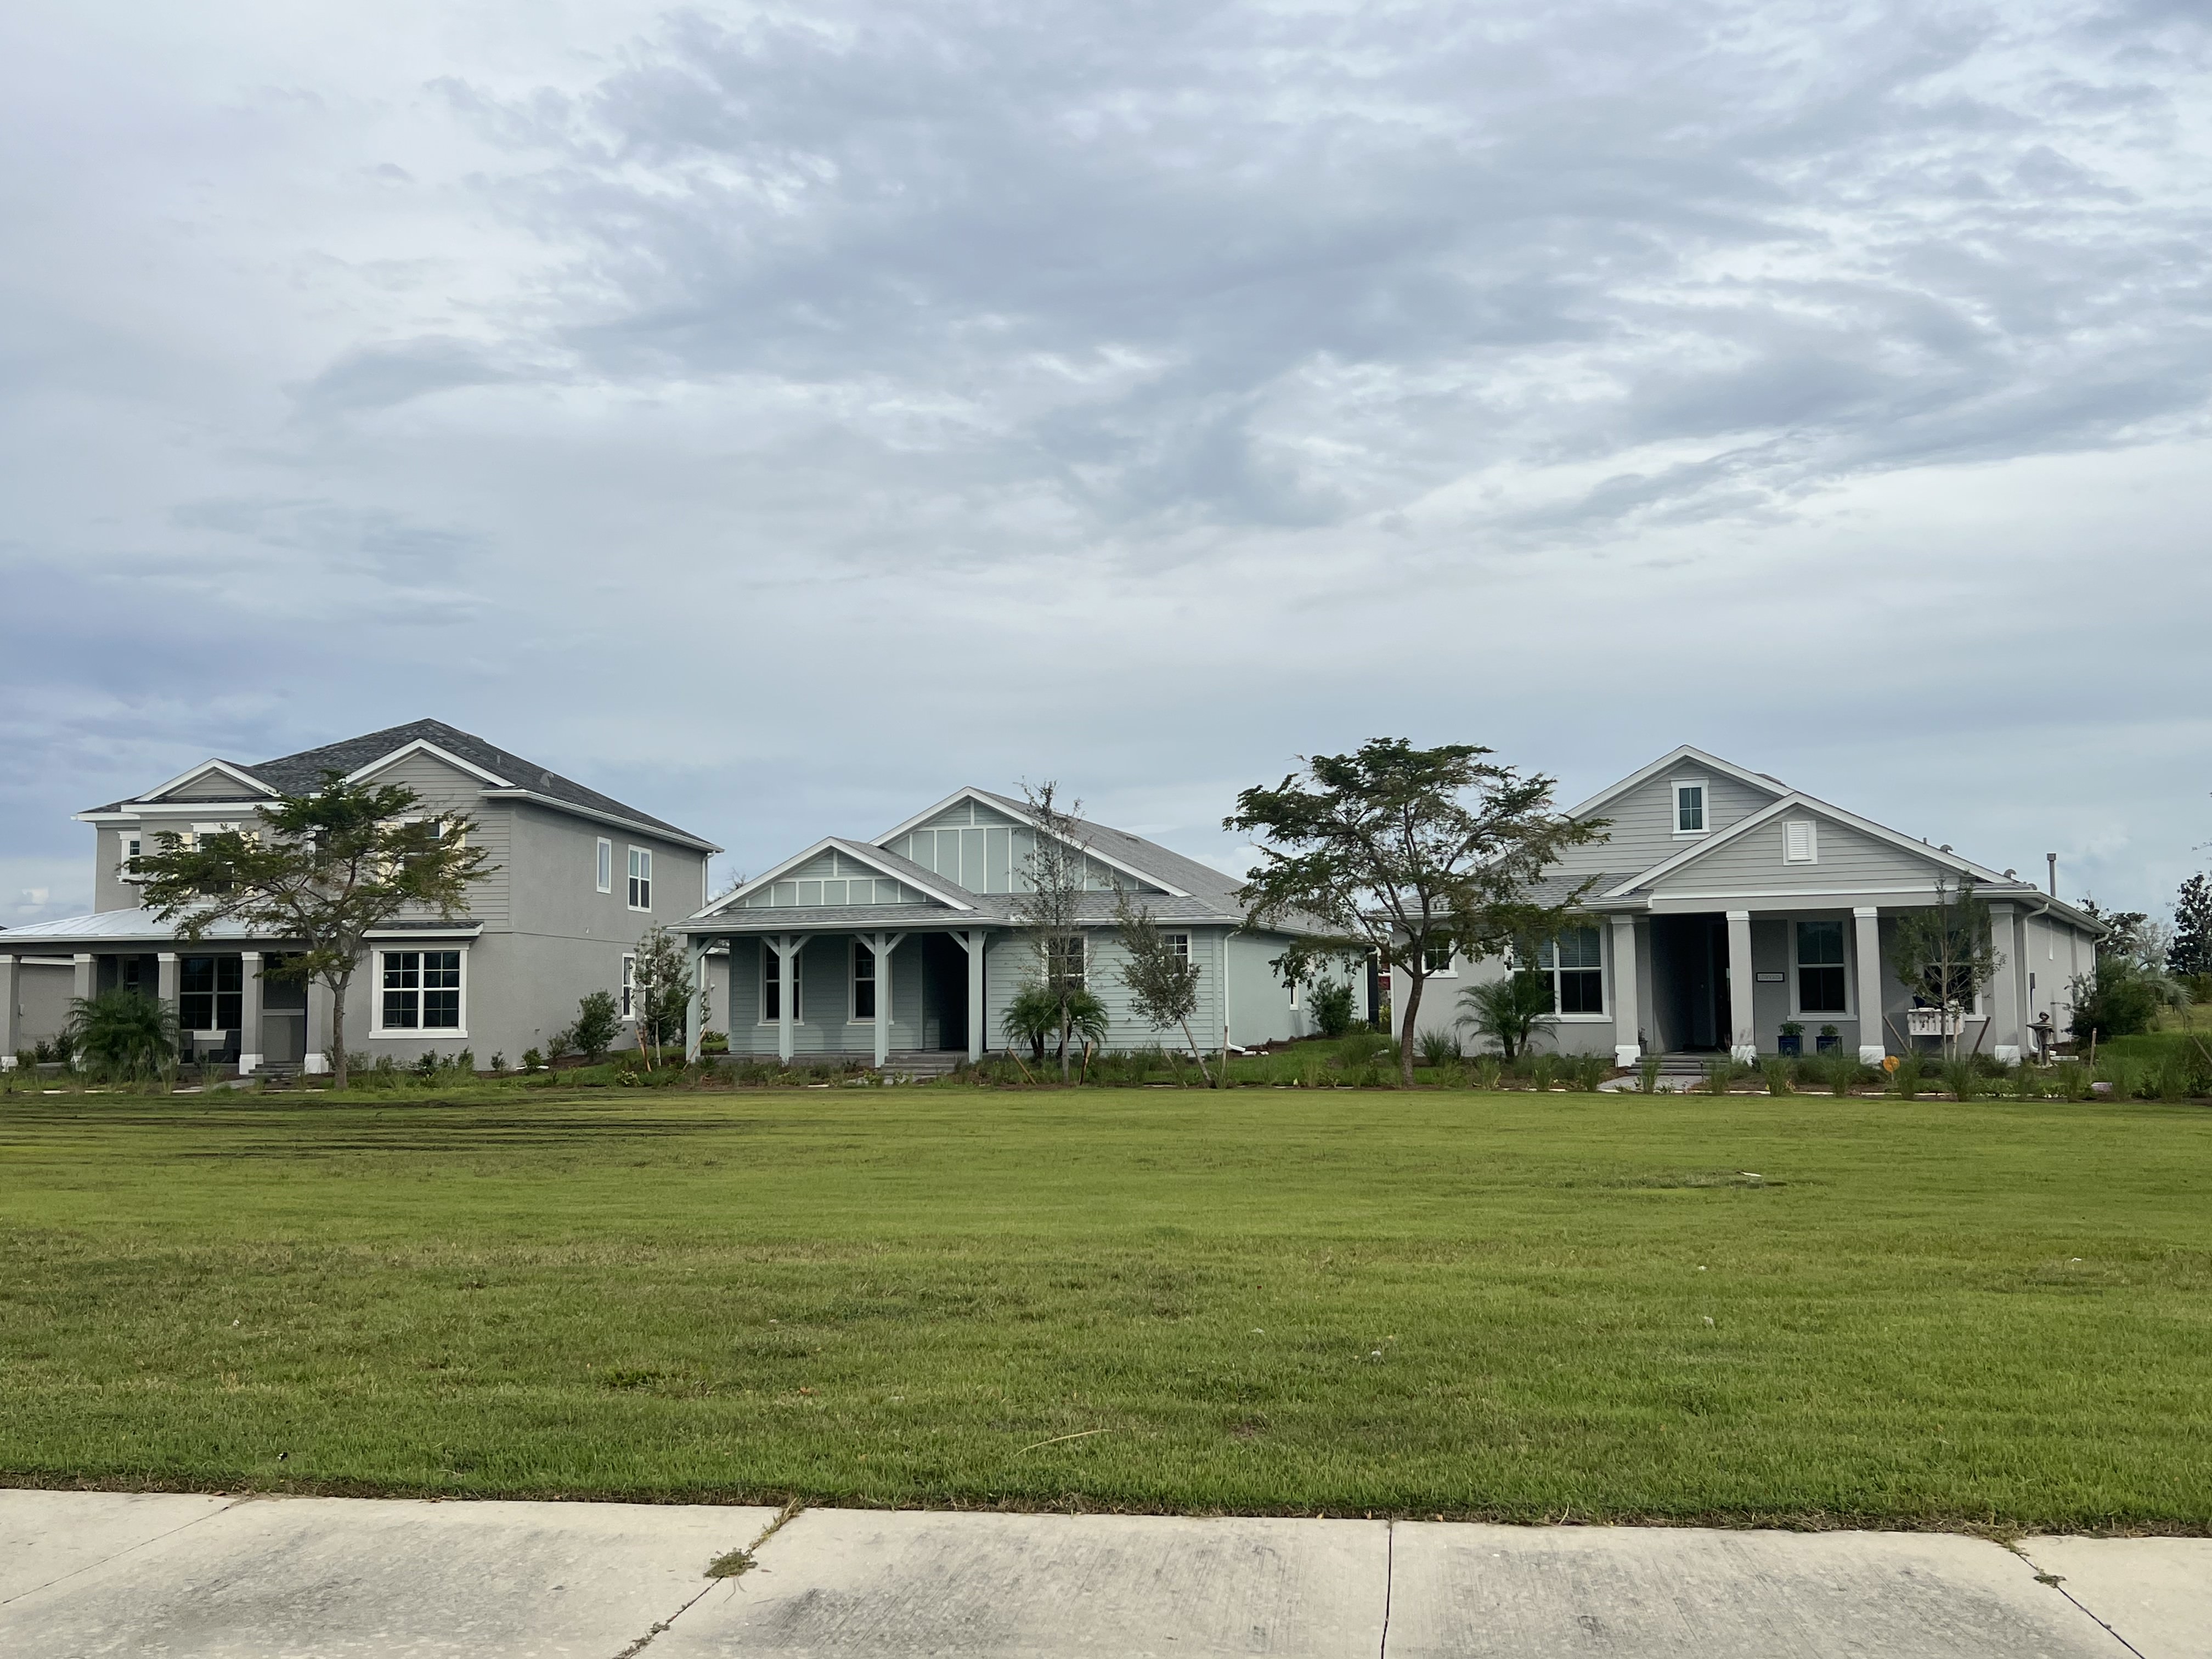 Houses at Babcock Ranch, a planned community with 4,600 residents, Charlotte County, Fla. (Lisa Hall)